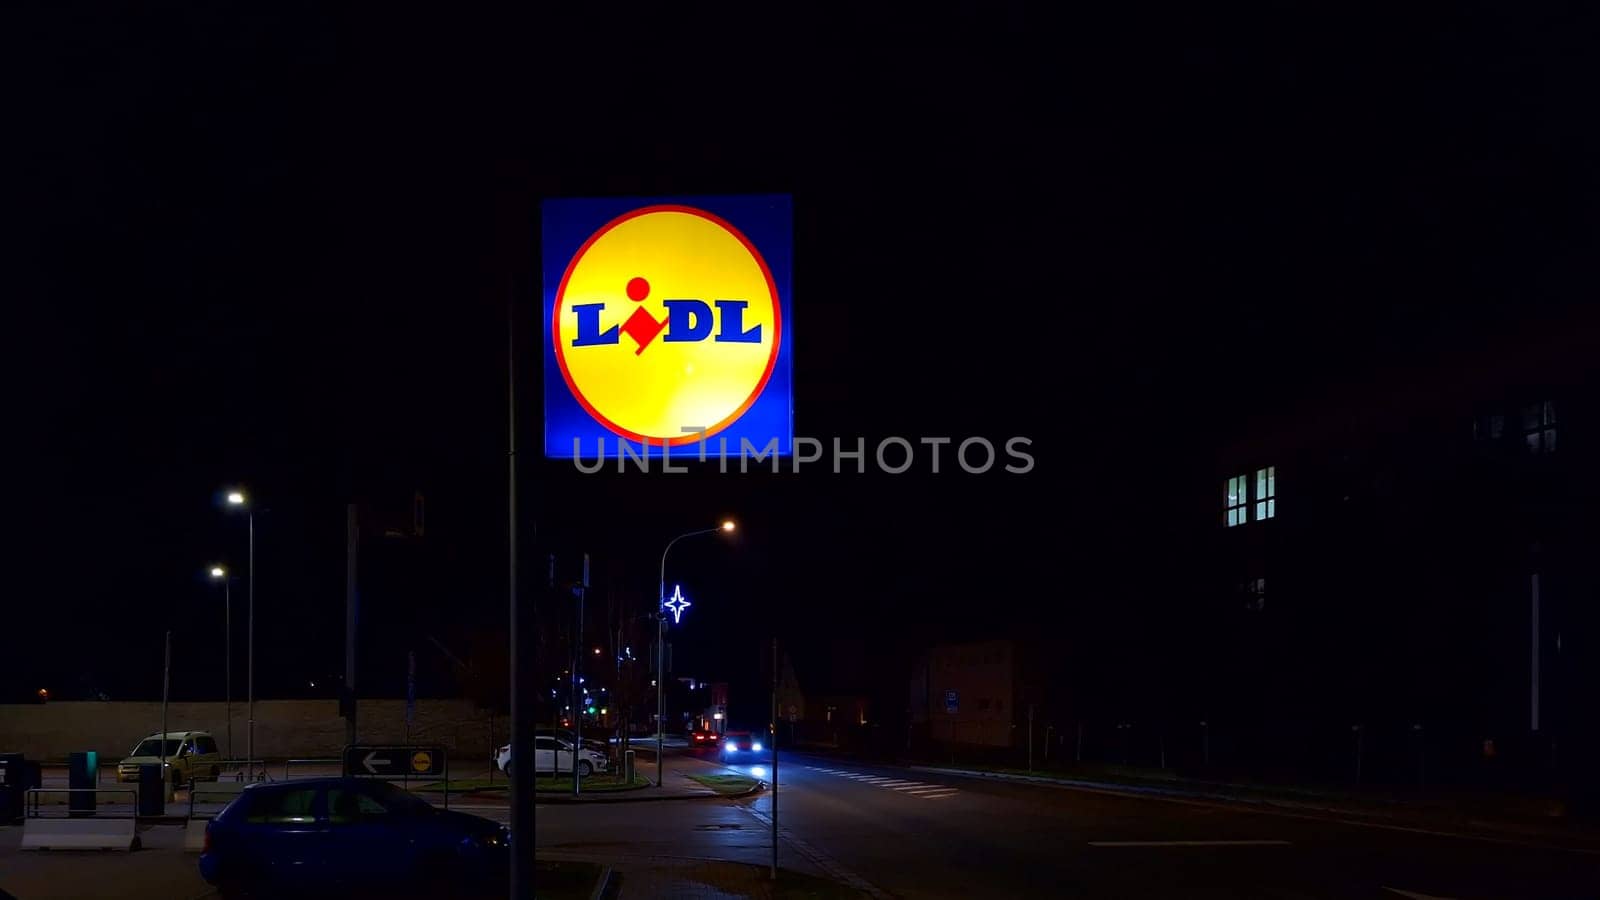 LIDL logo on hypermarket from German chain, part of Schwartz Gruppe which also owns Kaufland. Lidl is a German international discount retailer chain that operates over 12,000 stores, present in every member state of the European Union, Serbia, Switzerland, the United Kingdom and the United States. by roman_nerud